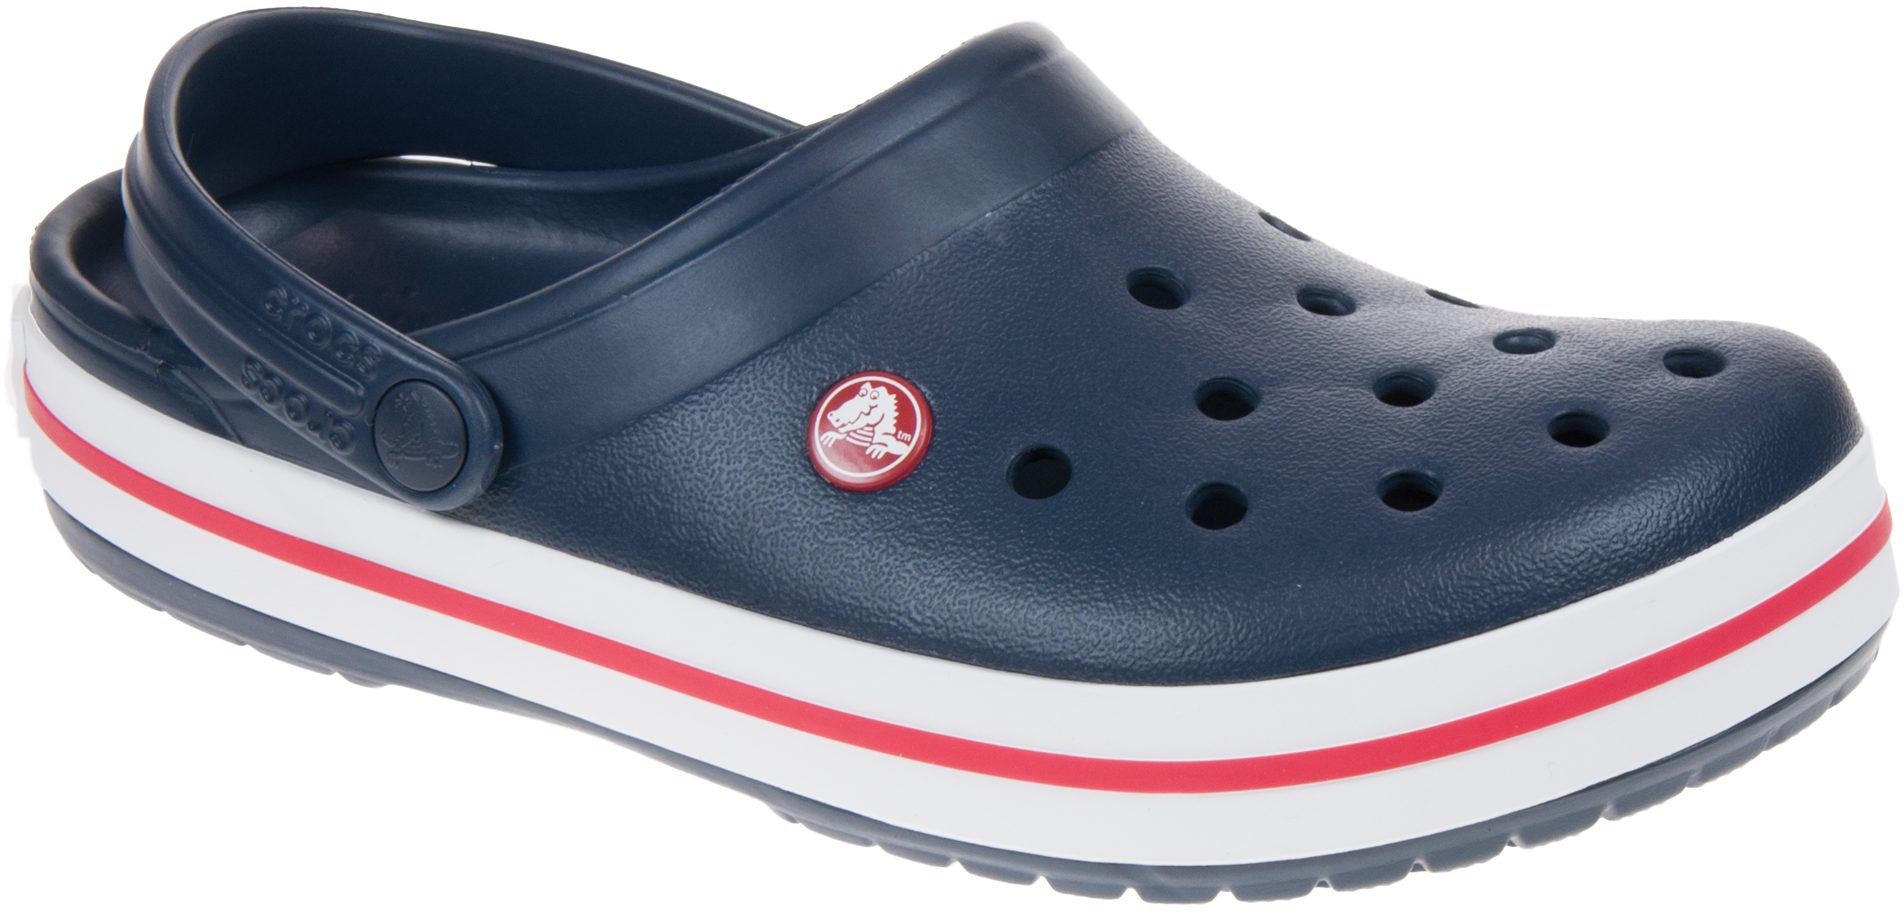 Crocs Crocband Clog Navy 110616-410 - Everyday Shoes - Humphries Shoes